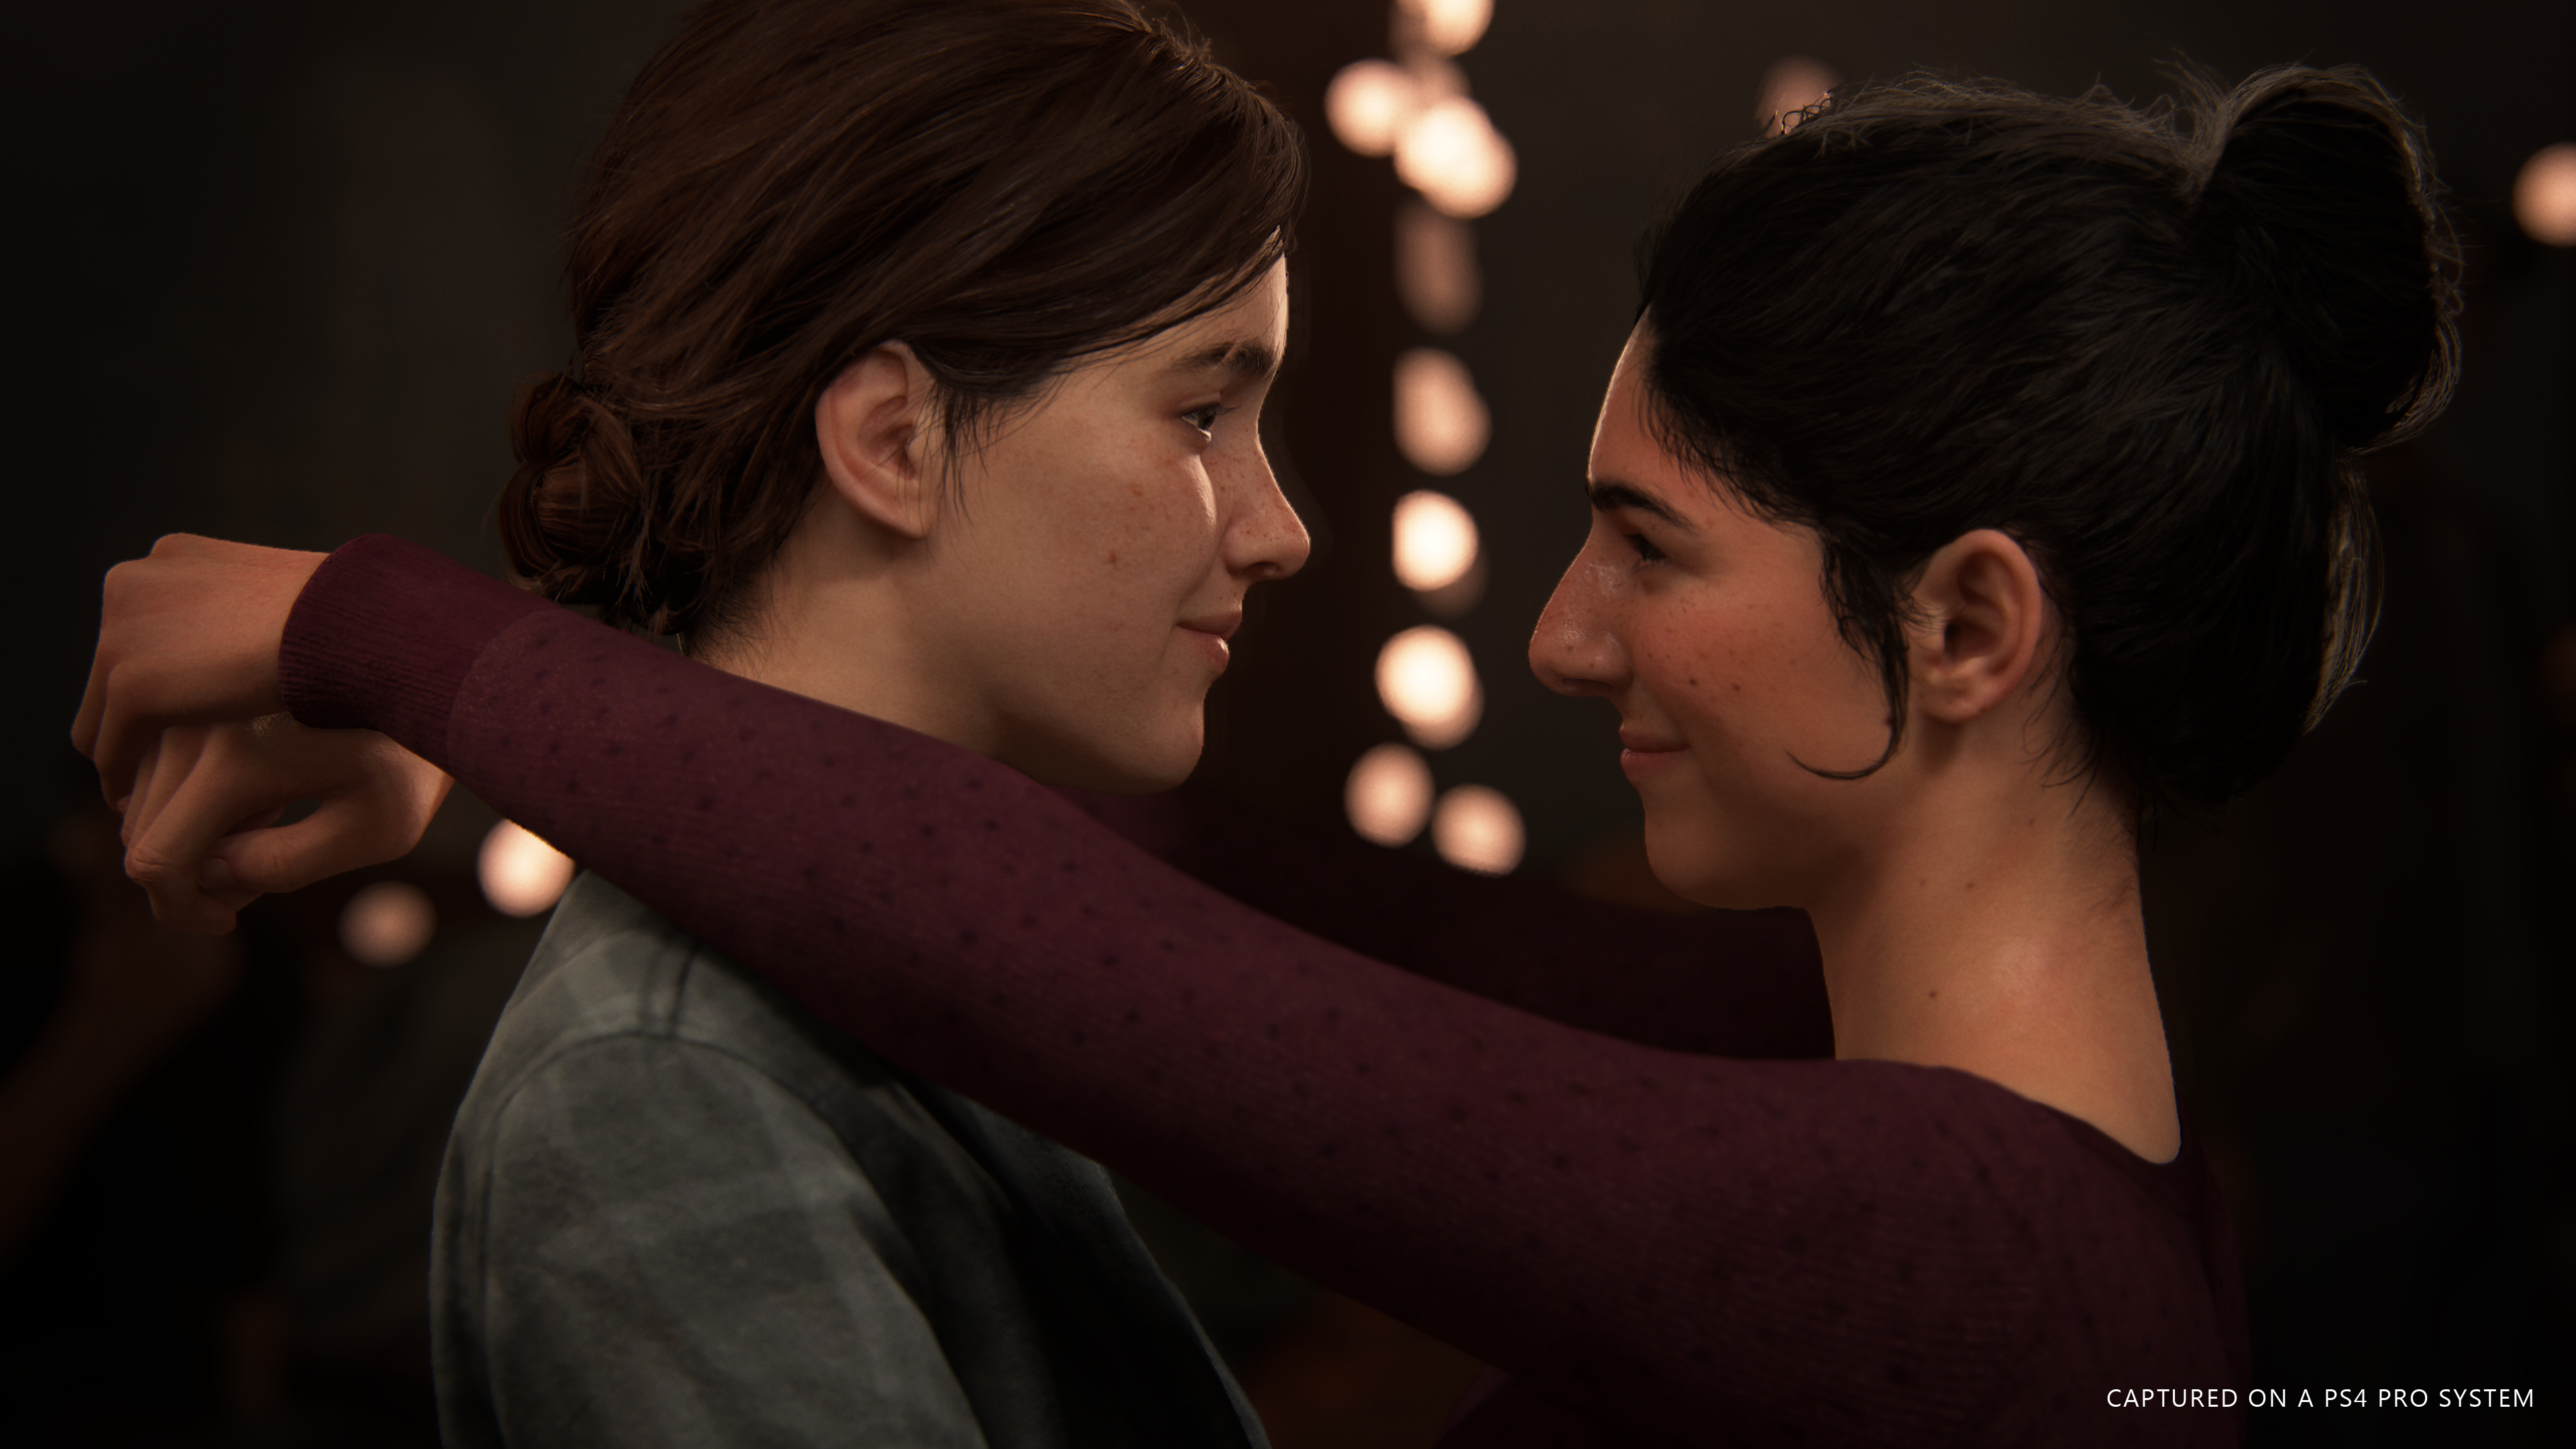 Will The Last of Us 2 Be on PC?